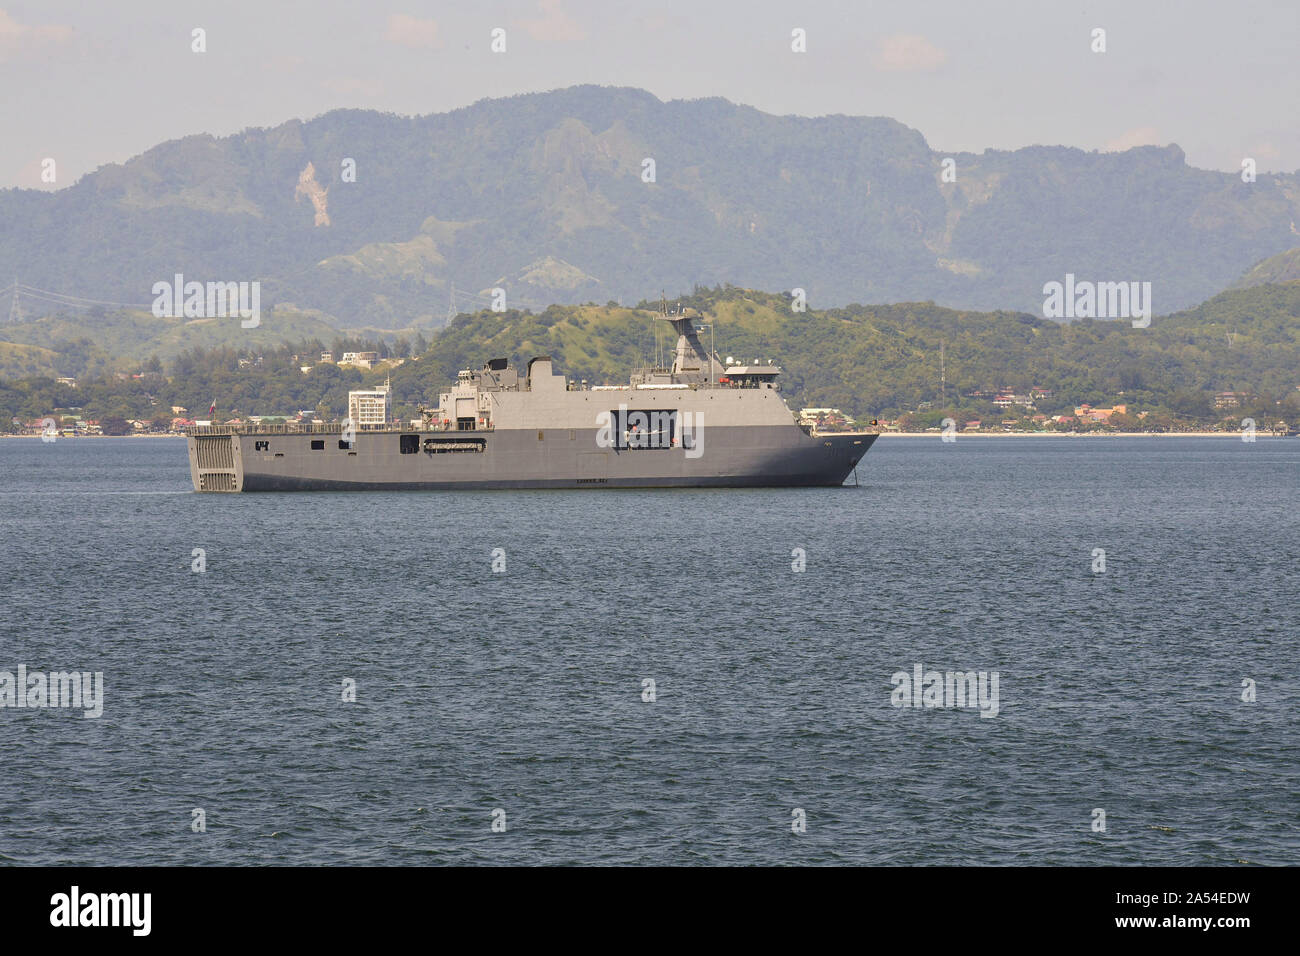 MANILA BAY (Oct. 13, 2019) The Philippine Navy ship BRP Davao Del Sur (LD-602) at anchor during exercise KAMANDAG 3. The Germantown is participating in KAMANDAG 3, a Philippine-led, bilateral exercise with the U.S., designed to increase counterterrorism, humanitarian assistance, and disaster relief capabilities through military exchanges that strengthen partnership and the ability to rapidly respond to crises throughout the Indo-Pacific region. KAMANDAG is an acronym for the Filipino phrase 'Kaagapay Ng Mga Mandirigma Ng Dagat,' which translates to 'Cooperation of Warriors of the Sea,' highlig Stock Photo